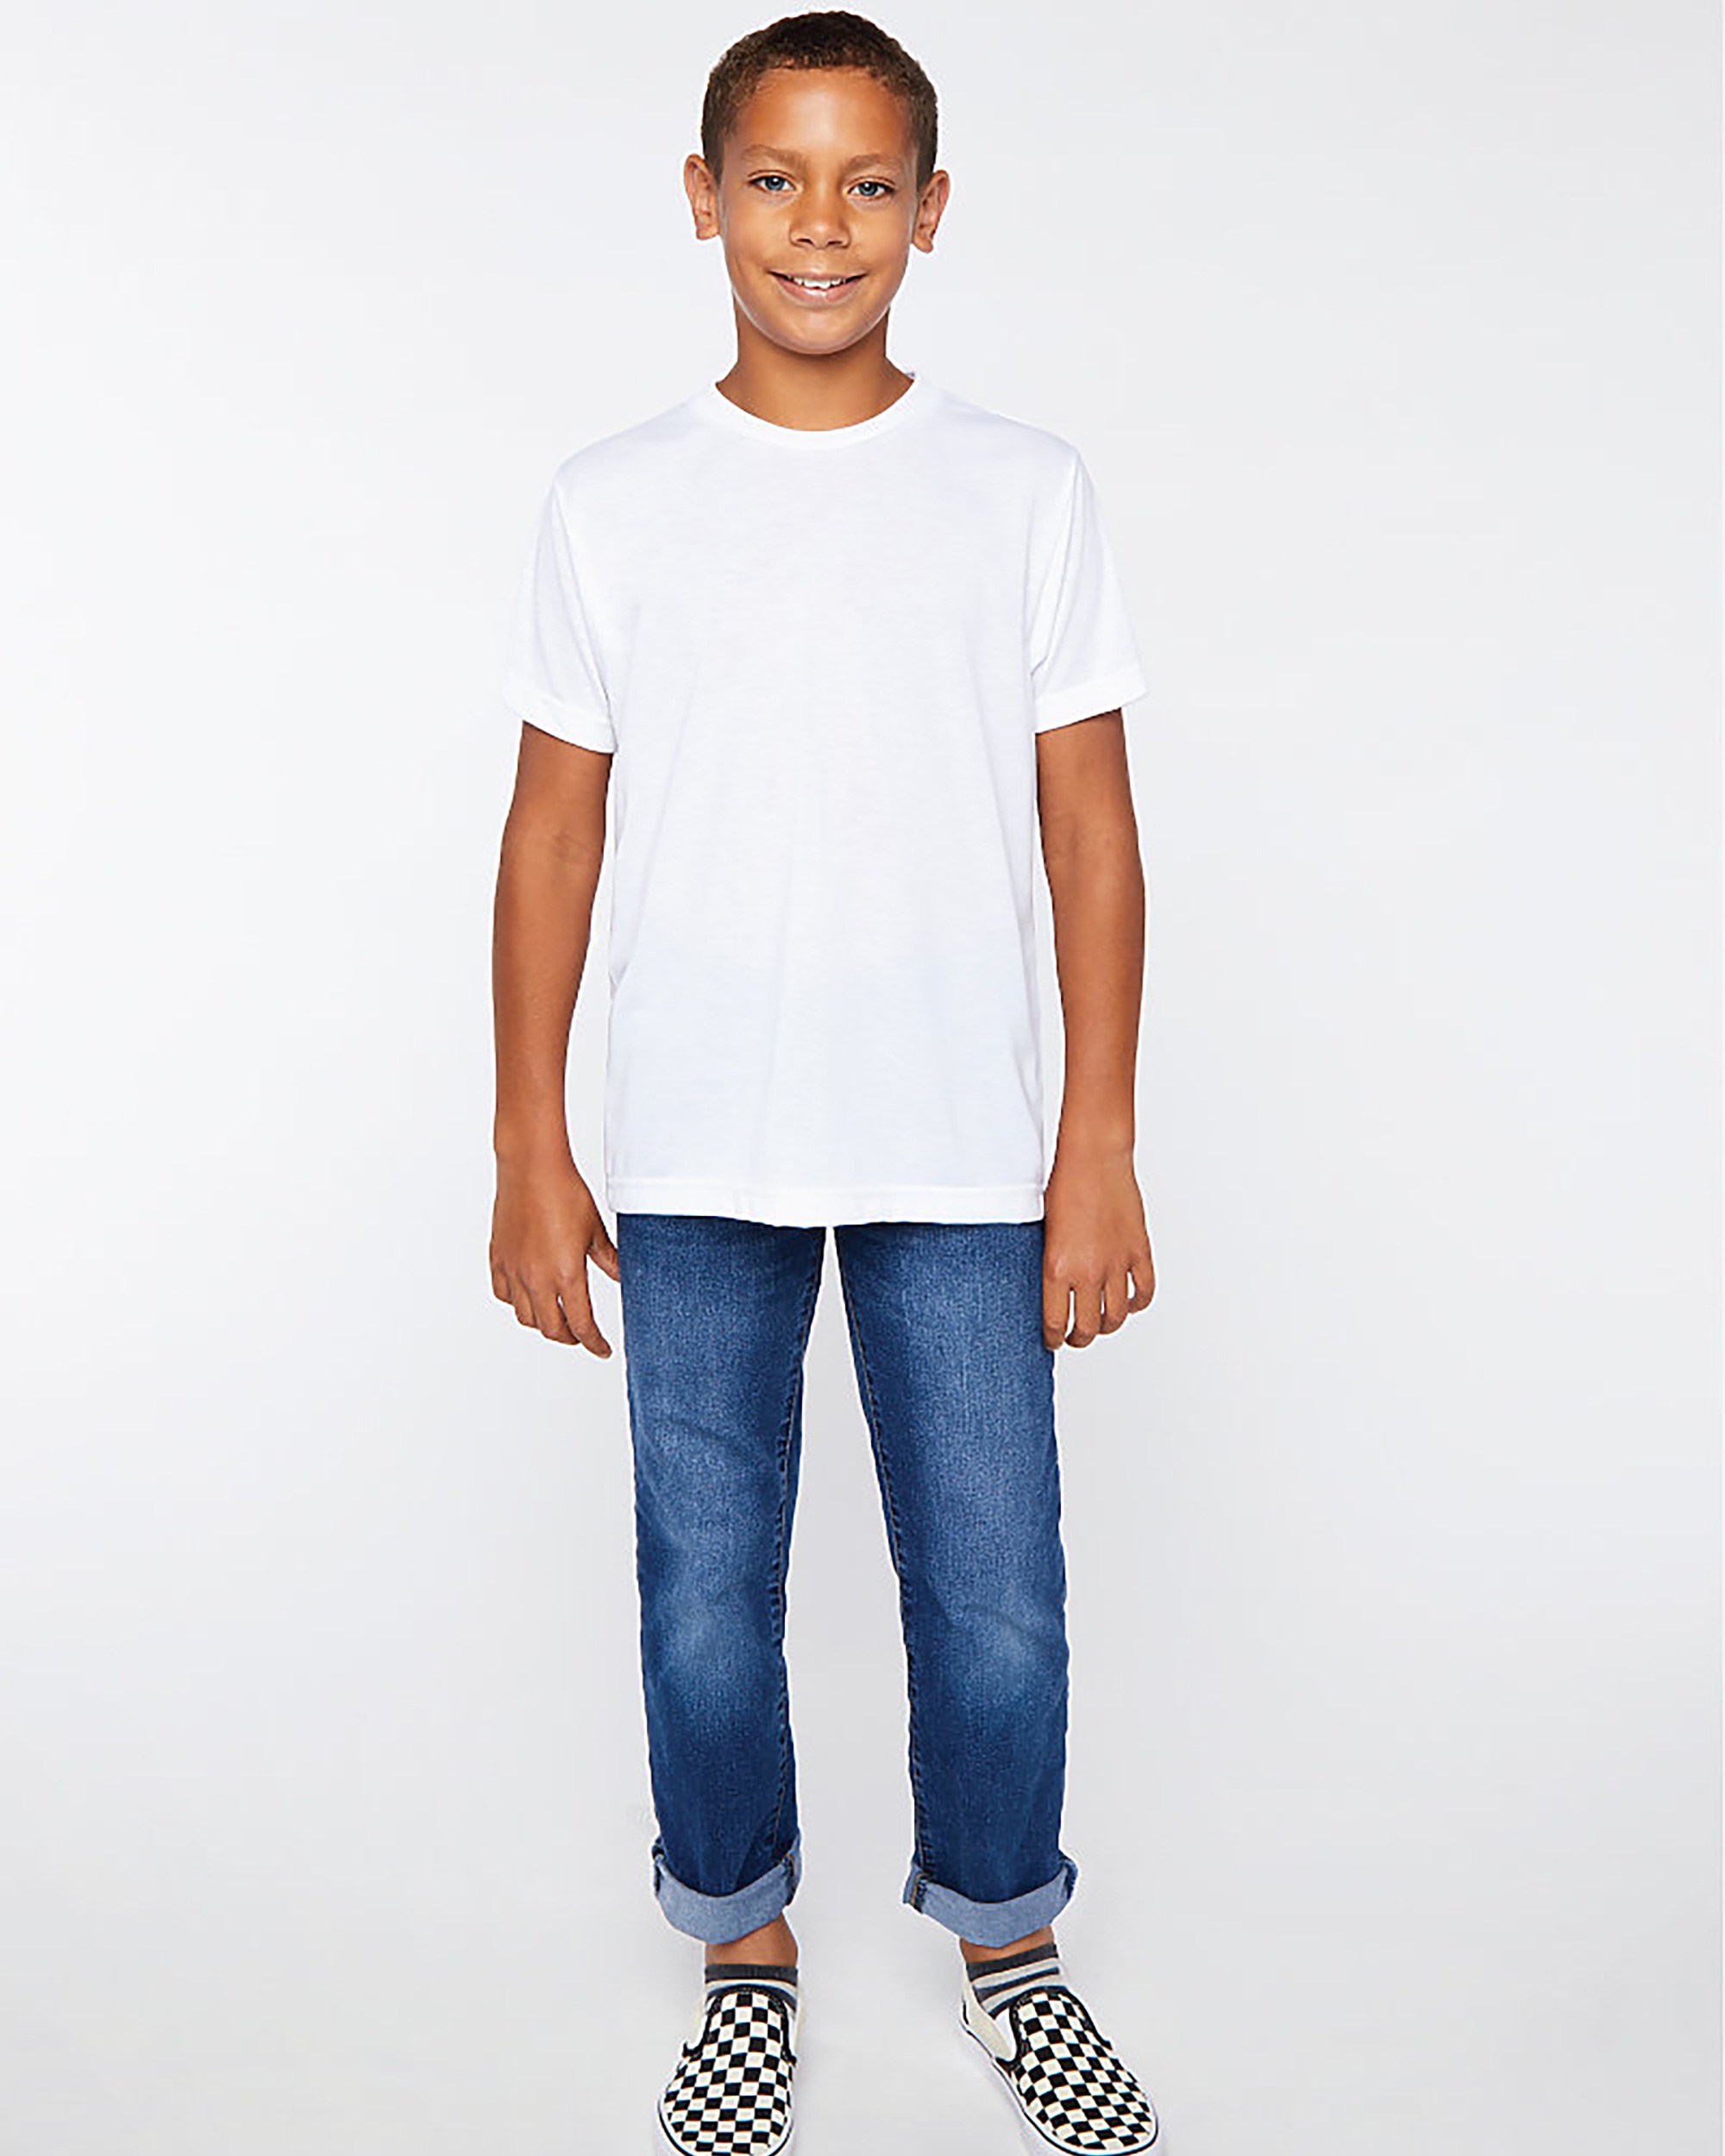 SubliVie 1210 Youth Sublimation Polyester Tee